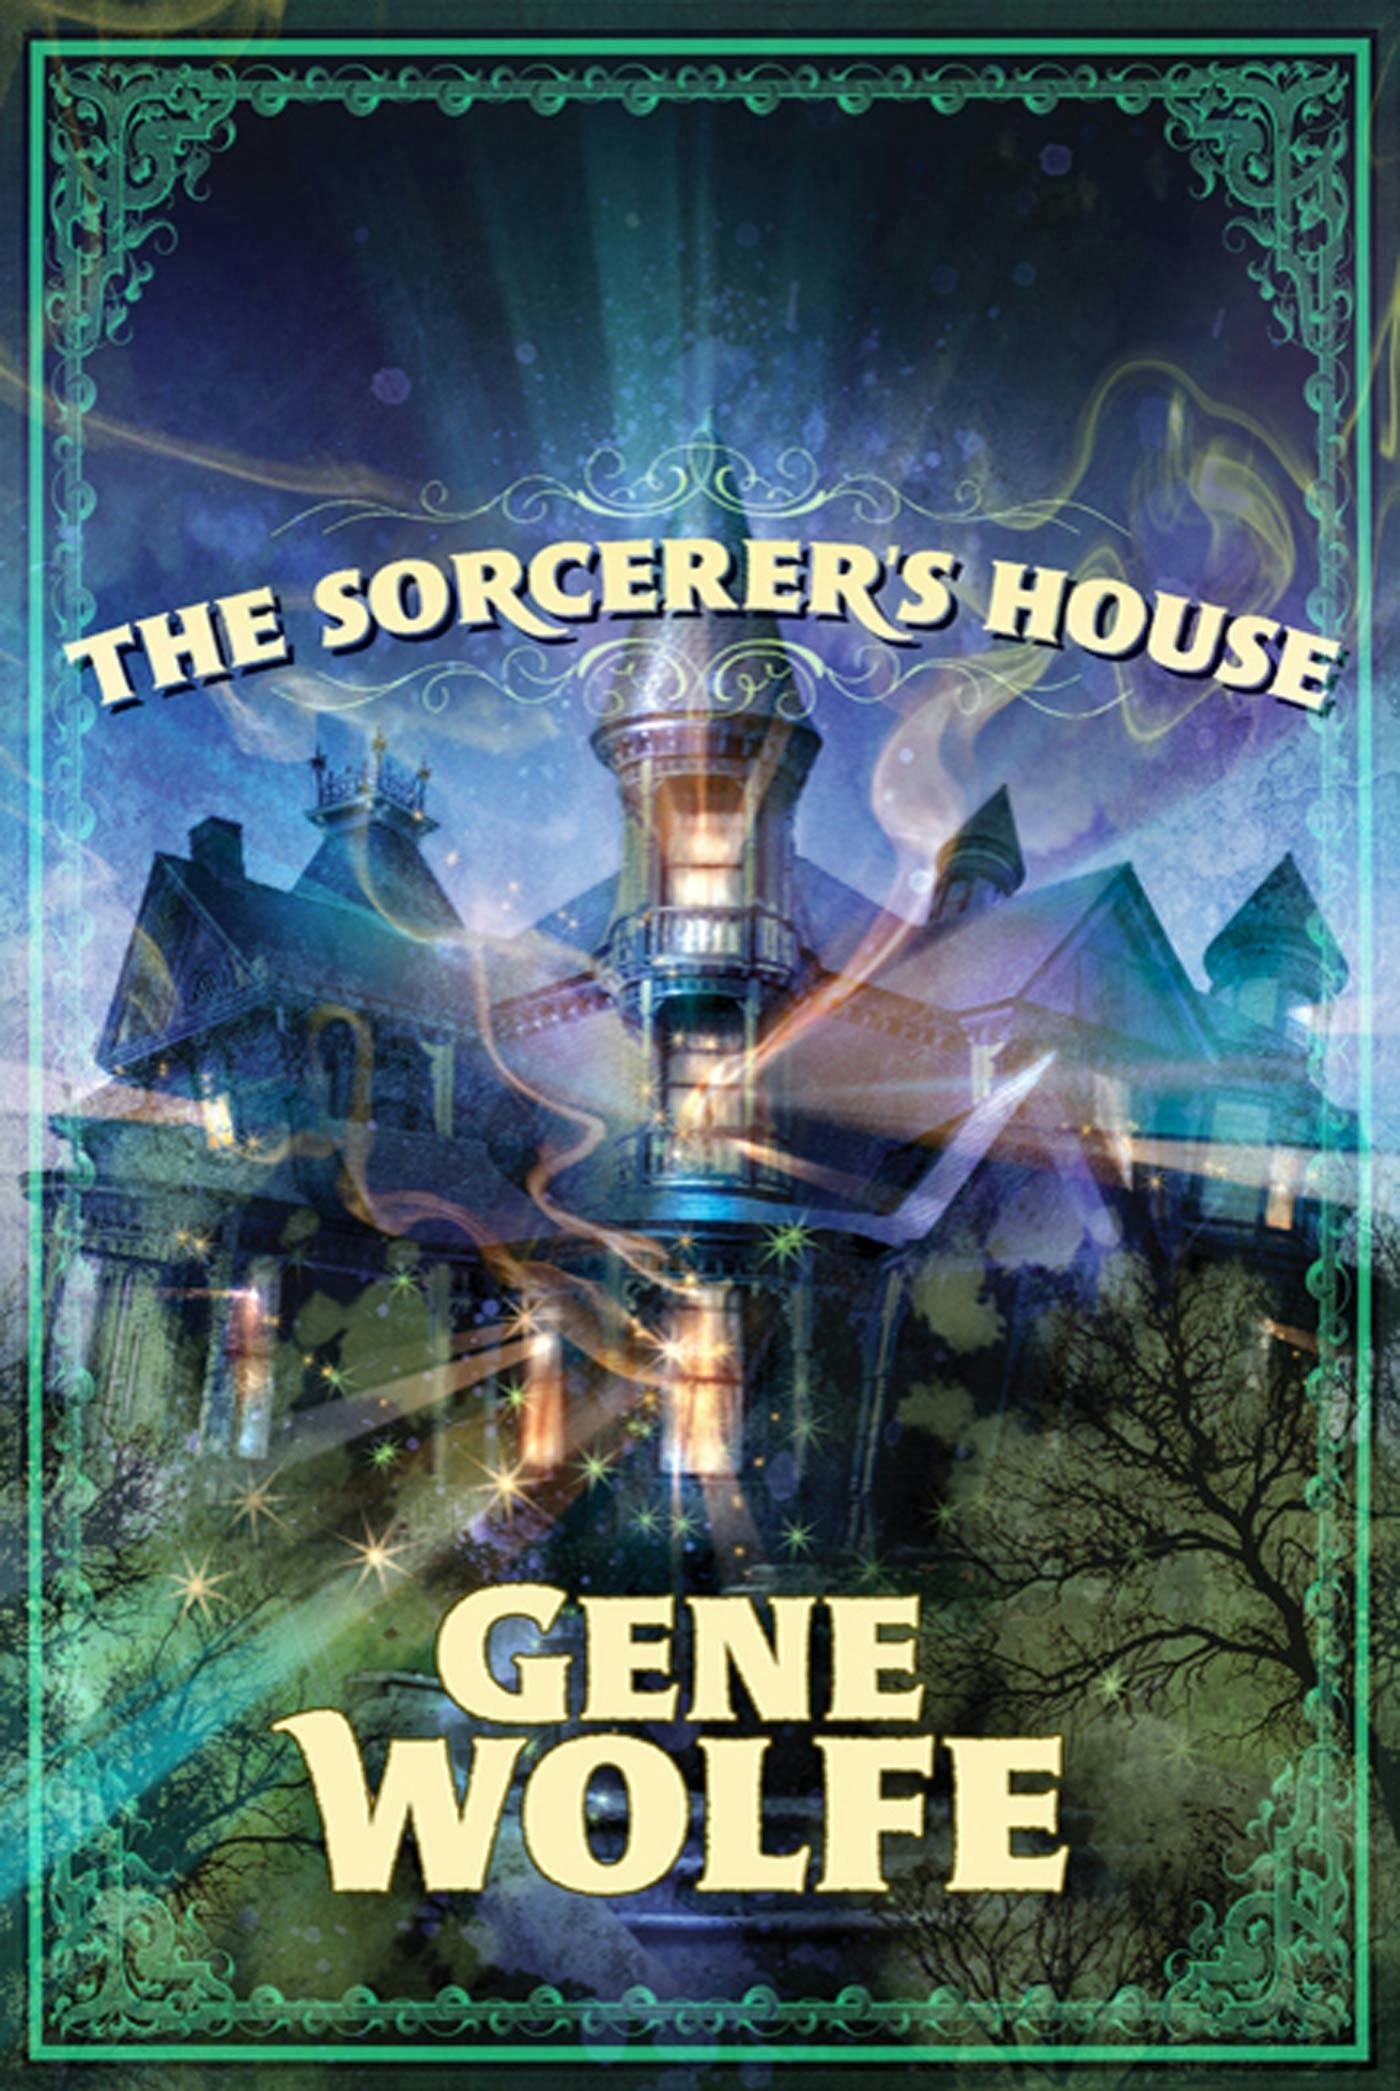 Cover for the book titled as: The Sorcerer's House